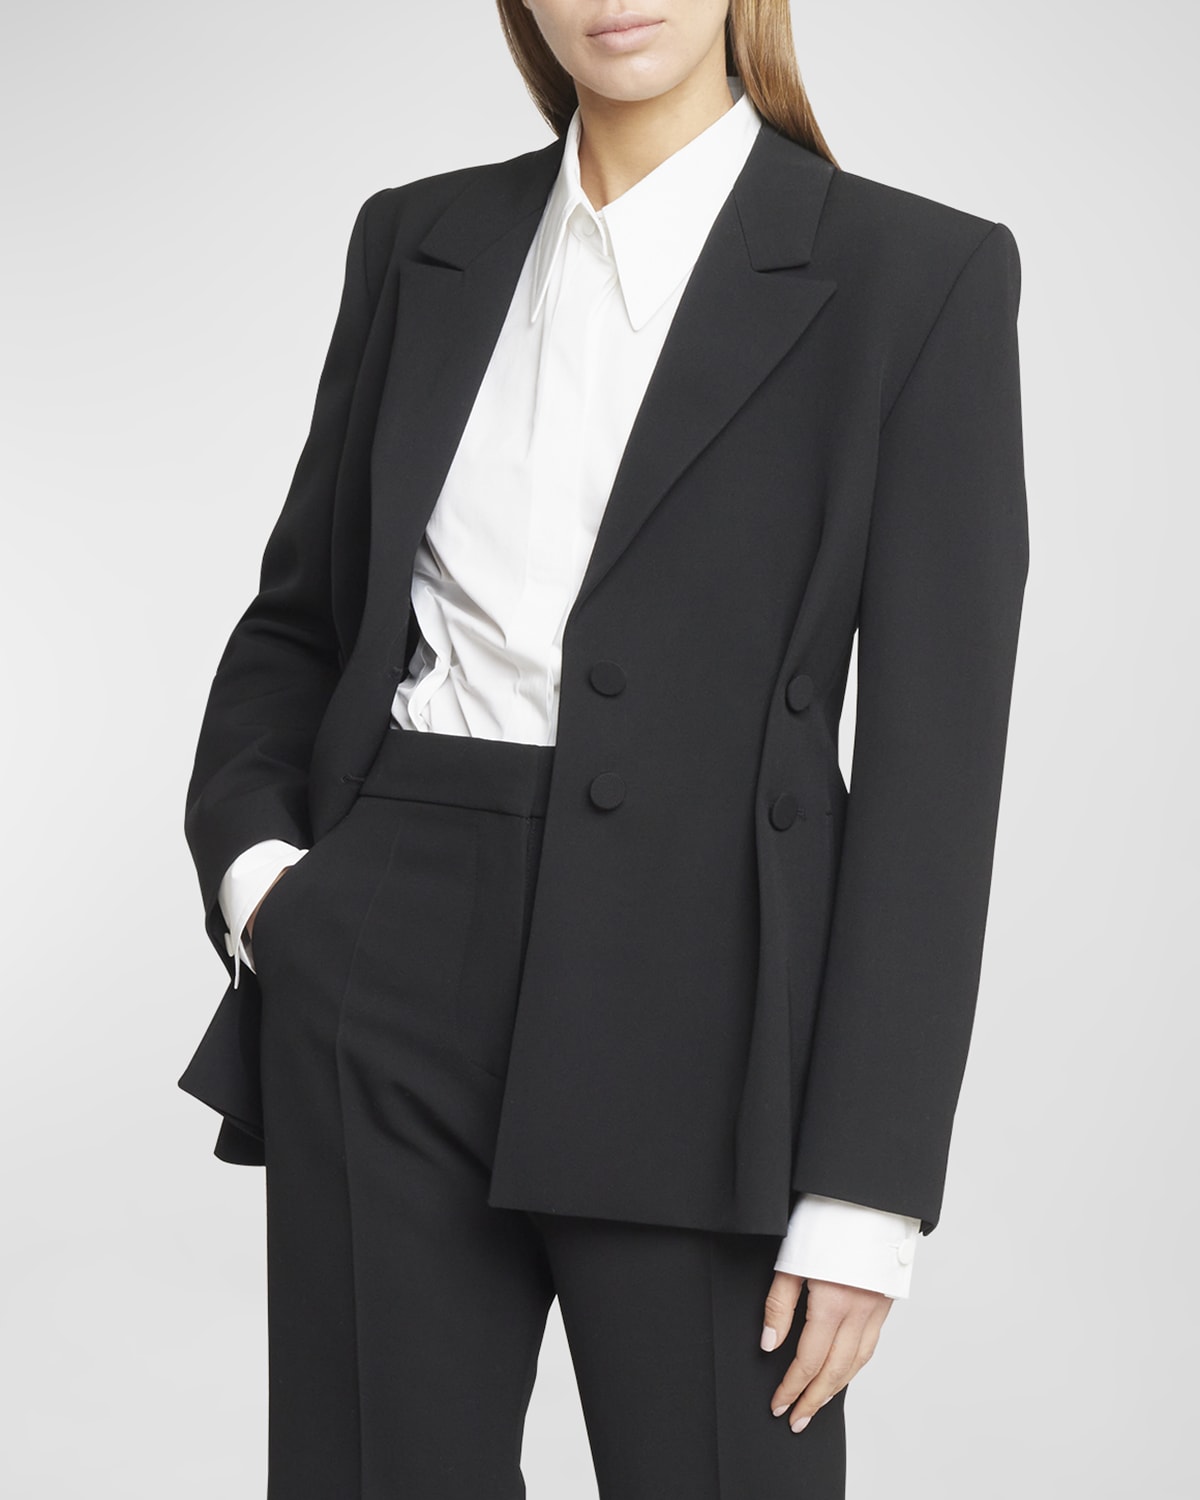 GIVENCHY SEAMED PEPLUM BLAZER WITH SIDE-PLEATED DETAIL